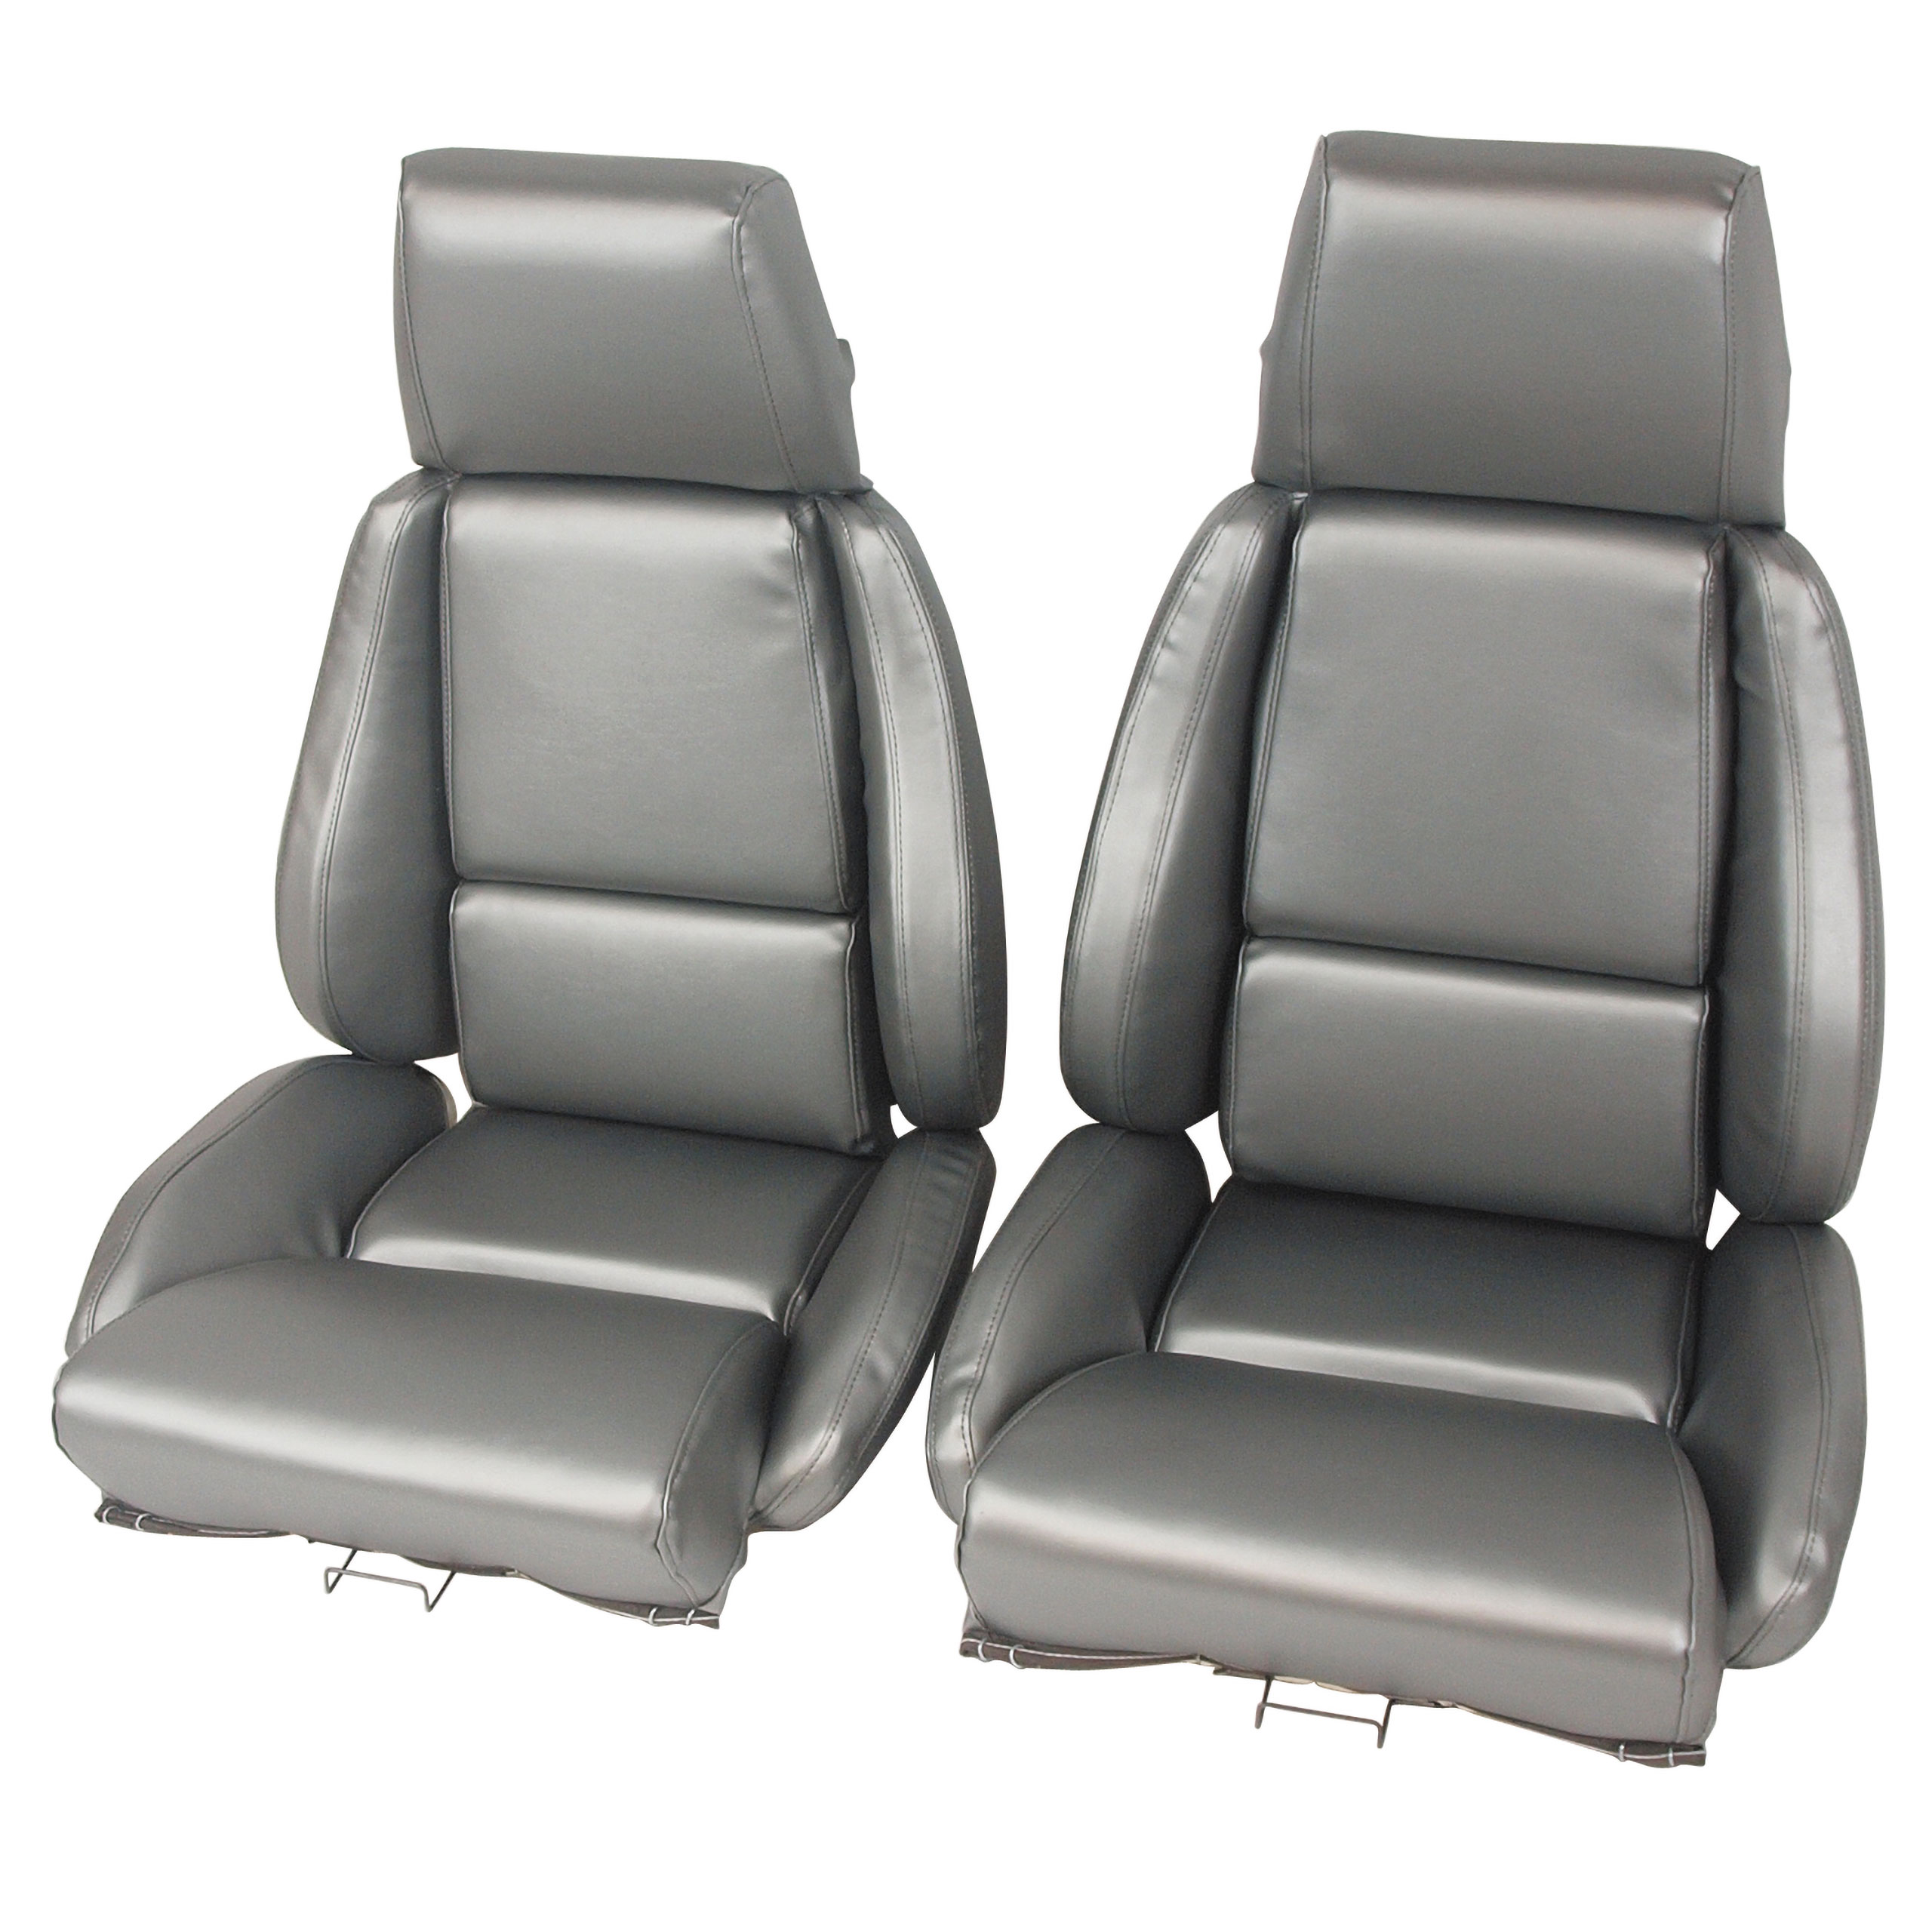 84-87 Corvette C4 468969 OE Style Leather-Like Sport Seat Covers W/O Perforated Inserts Gray CA-468869 